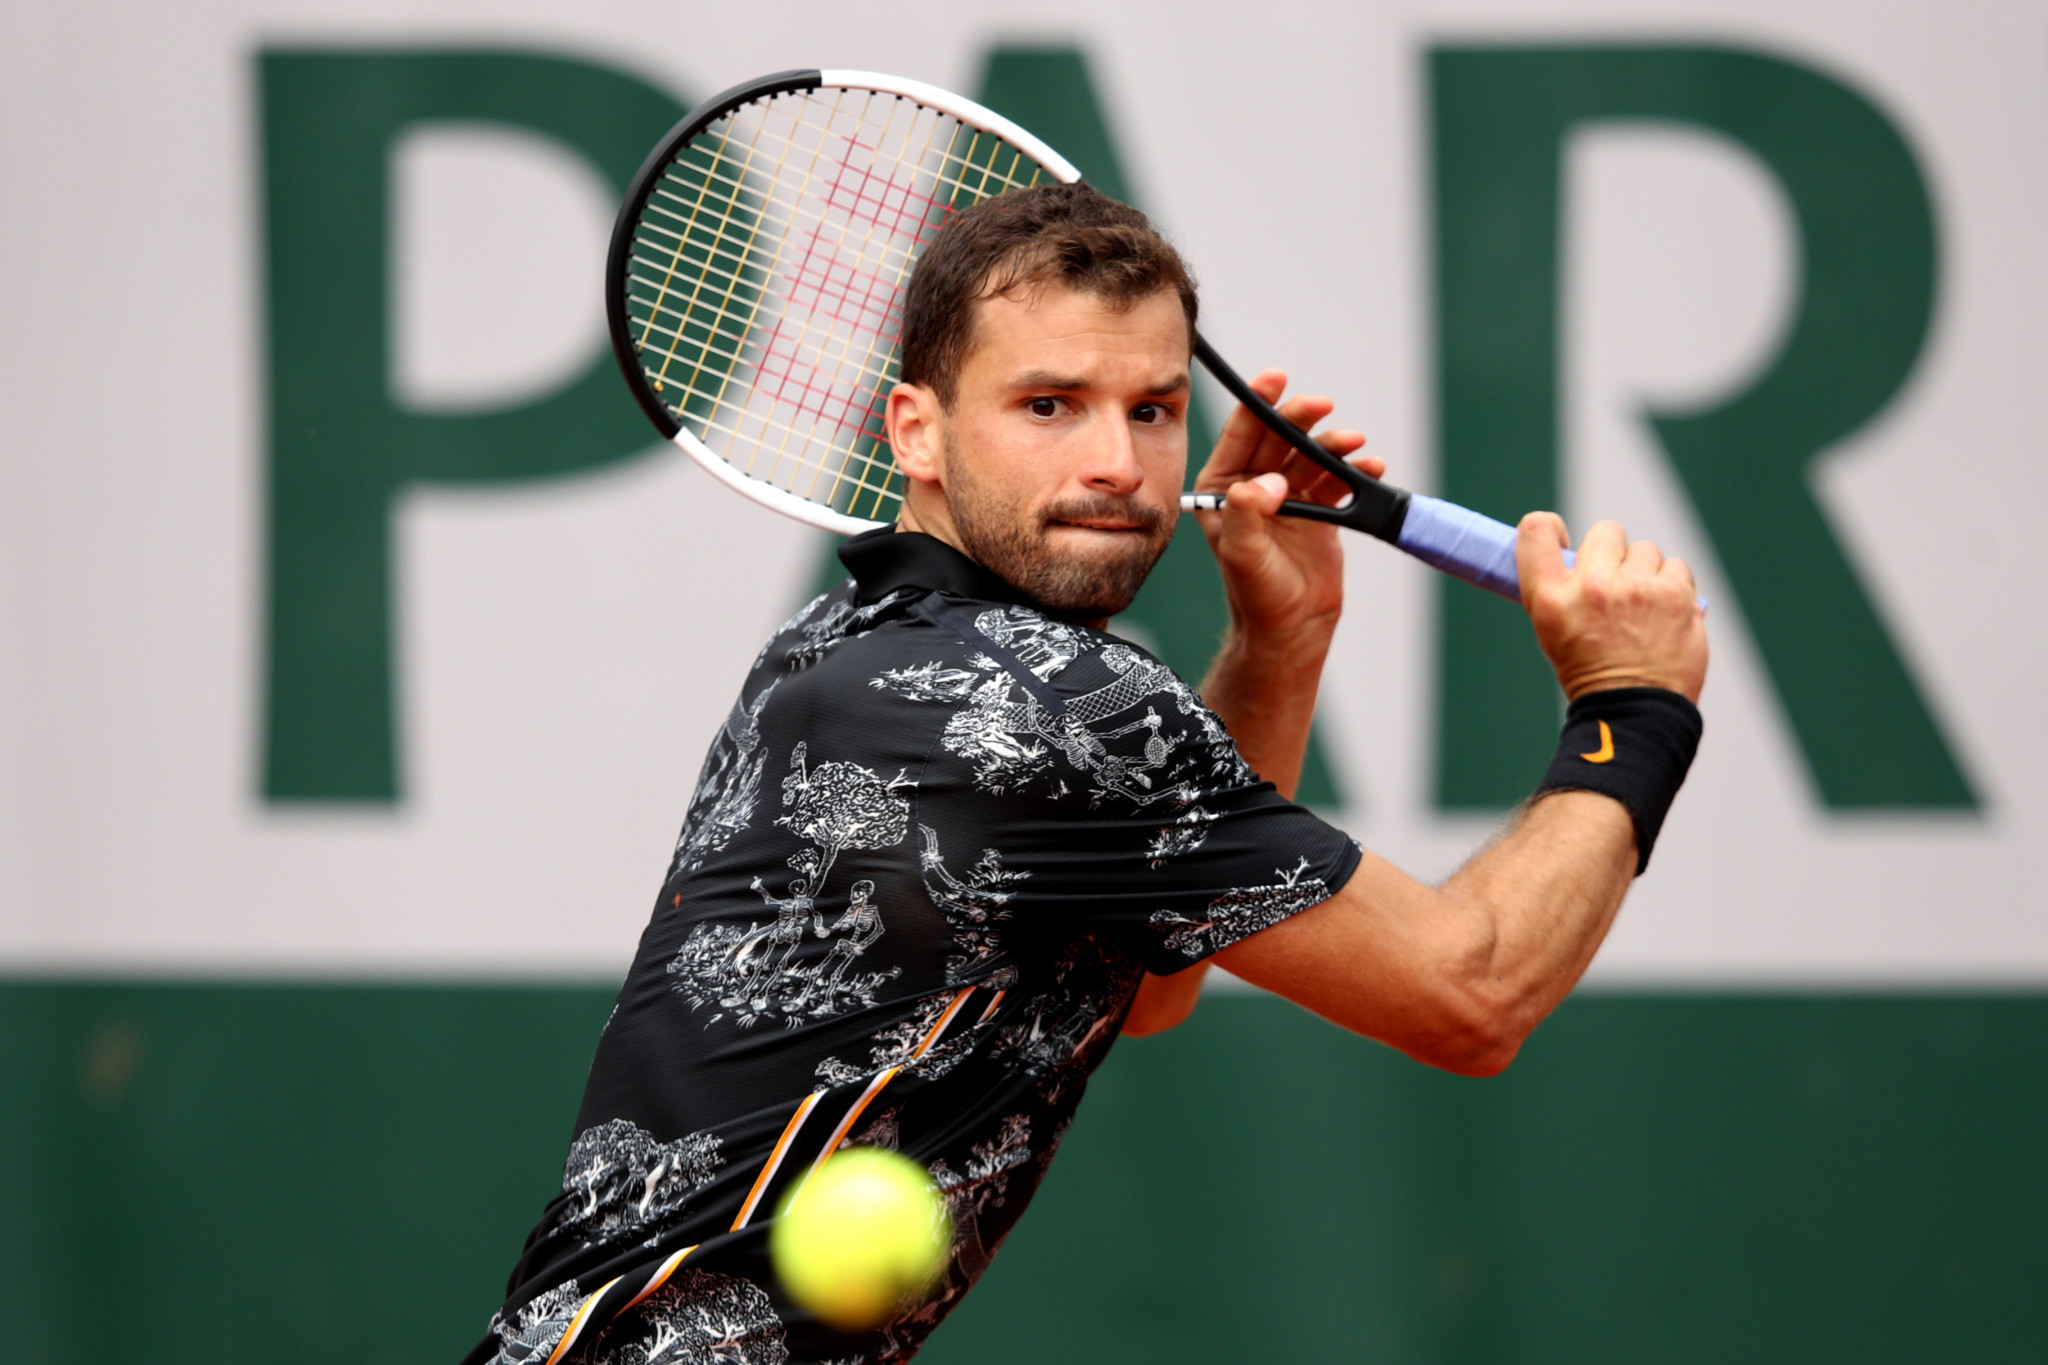 Bulgaria's Grigor Dimitrov was the victor in a five-set battle against Serbia's Janko Tipsarević at the French Open ©Getty Images